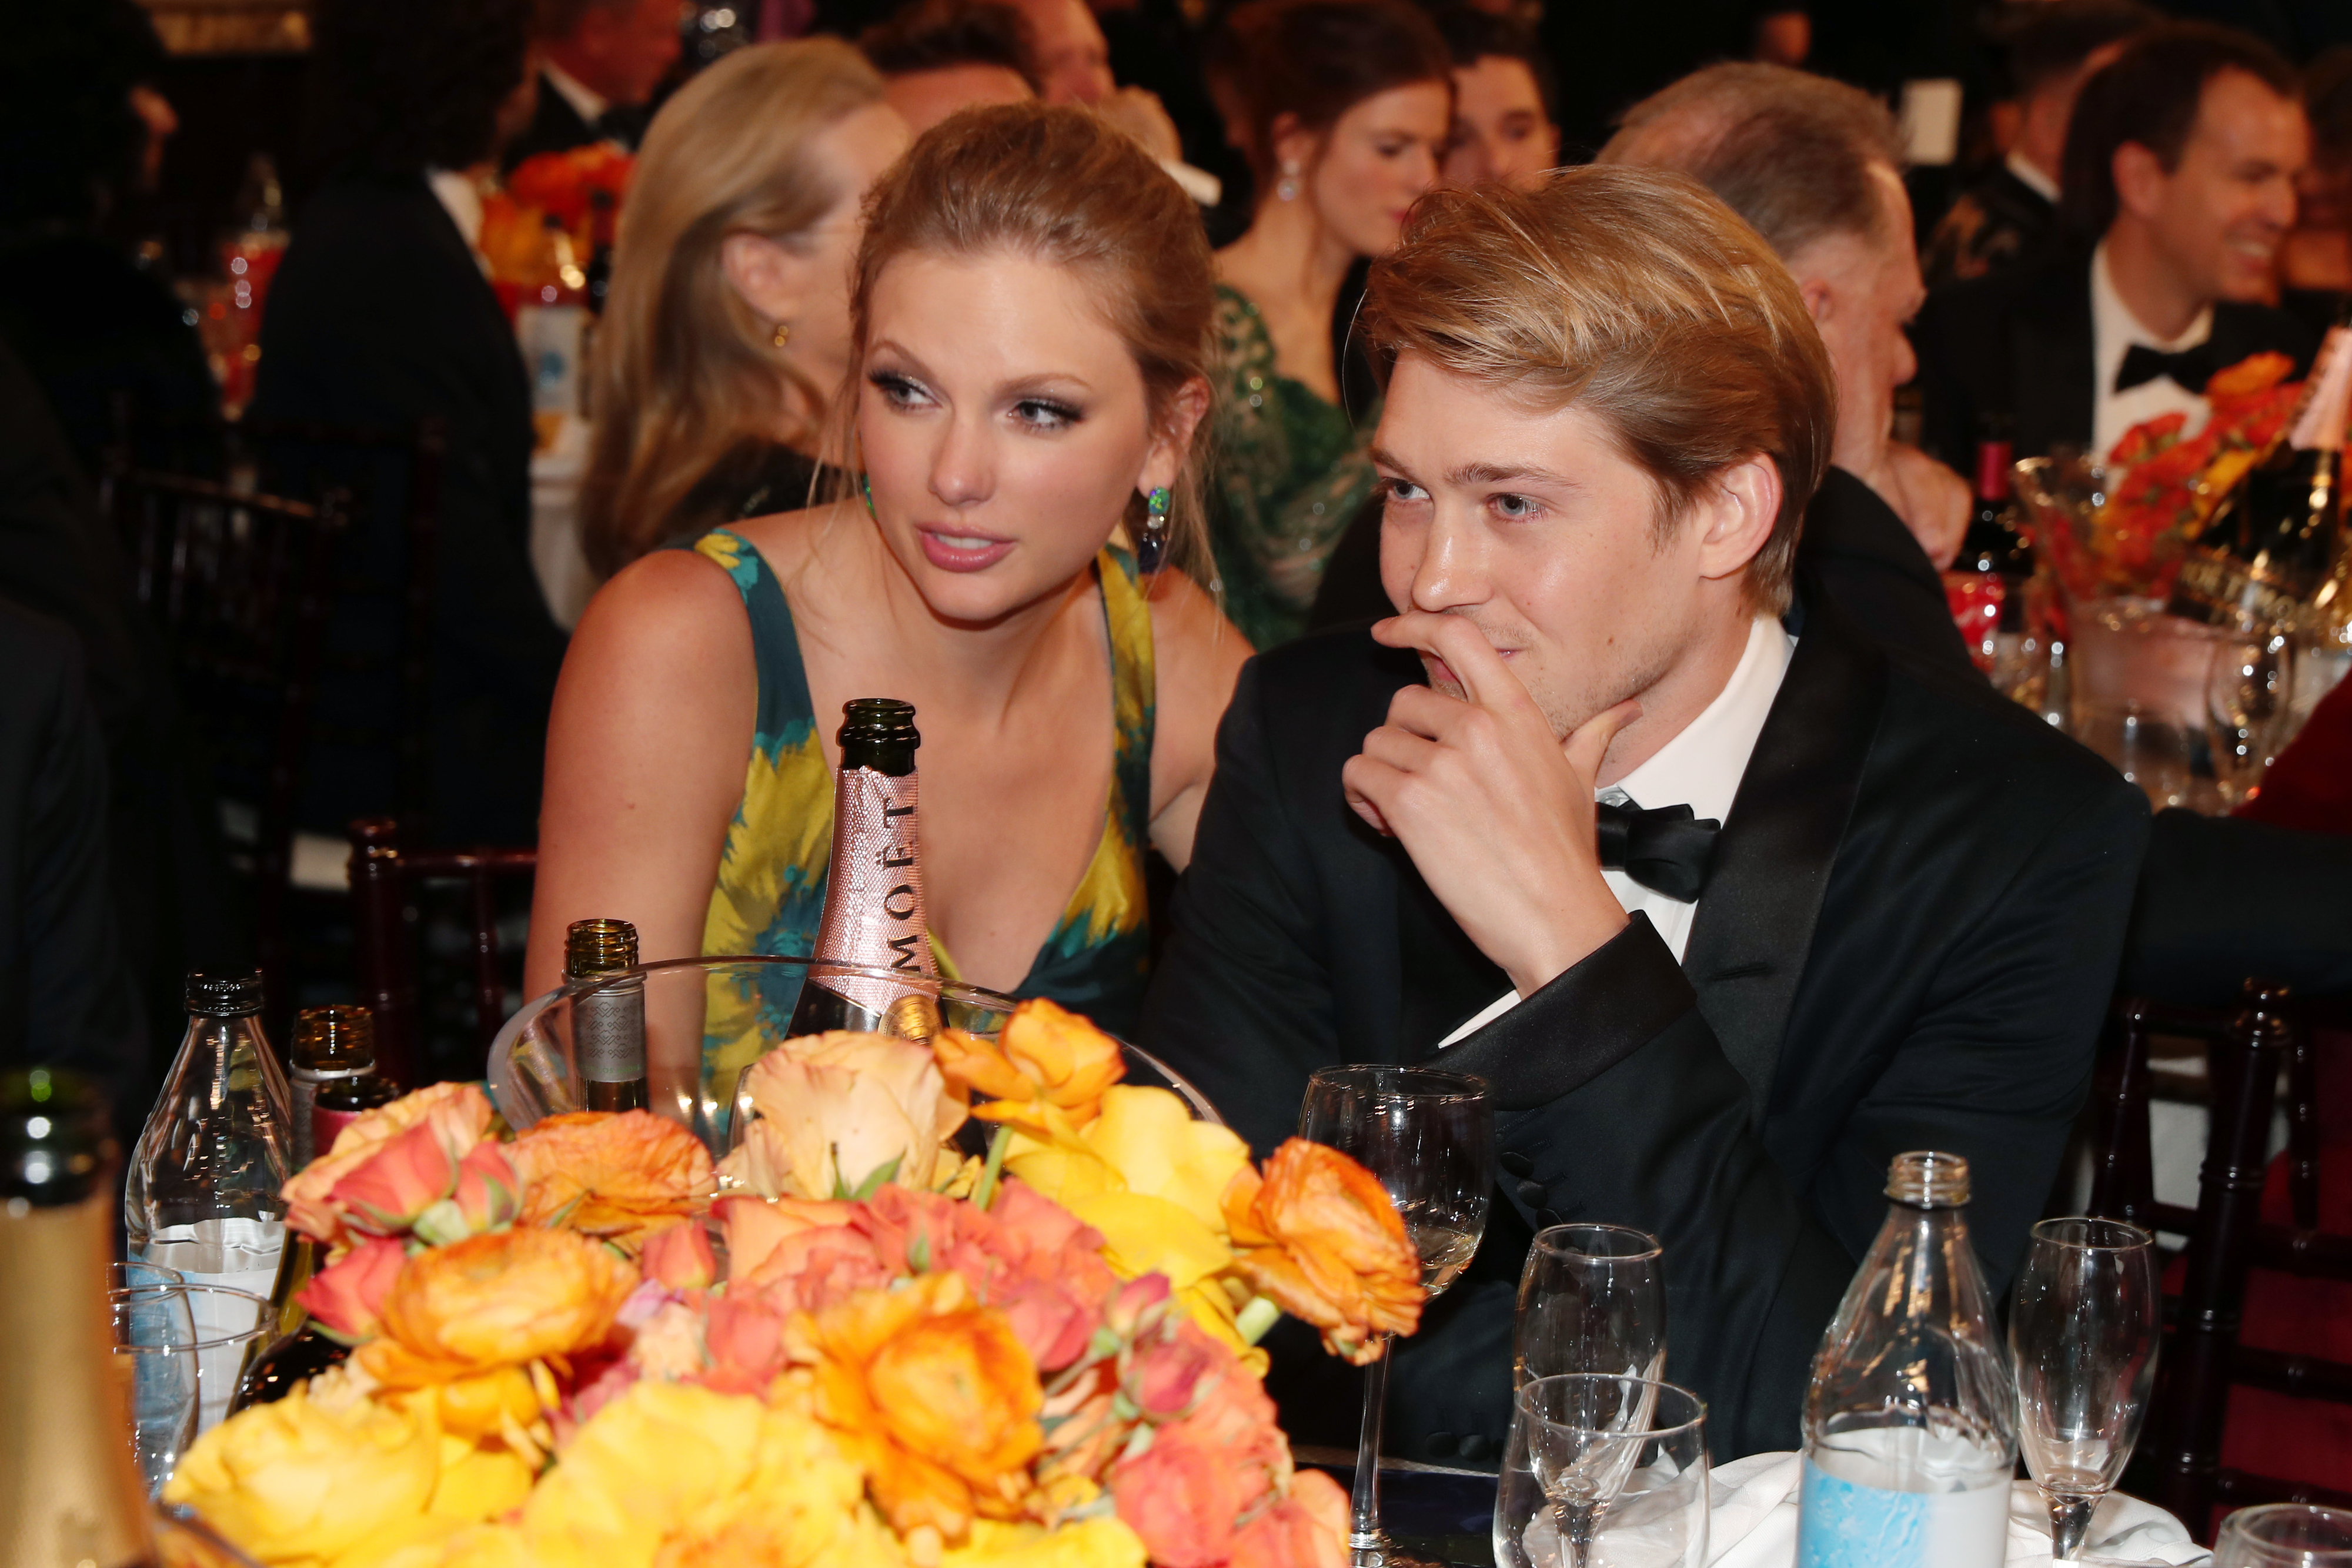 Taylor sitting with Joe at a table with champagne and other bottles and glasses